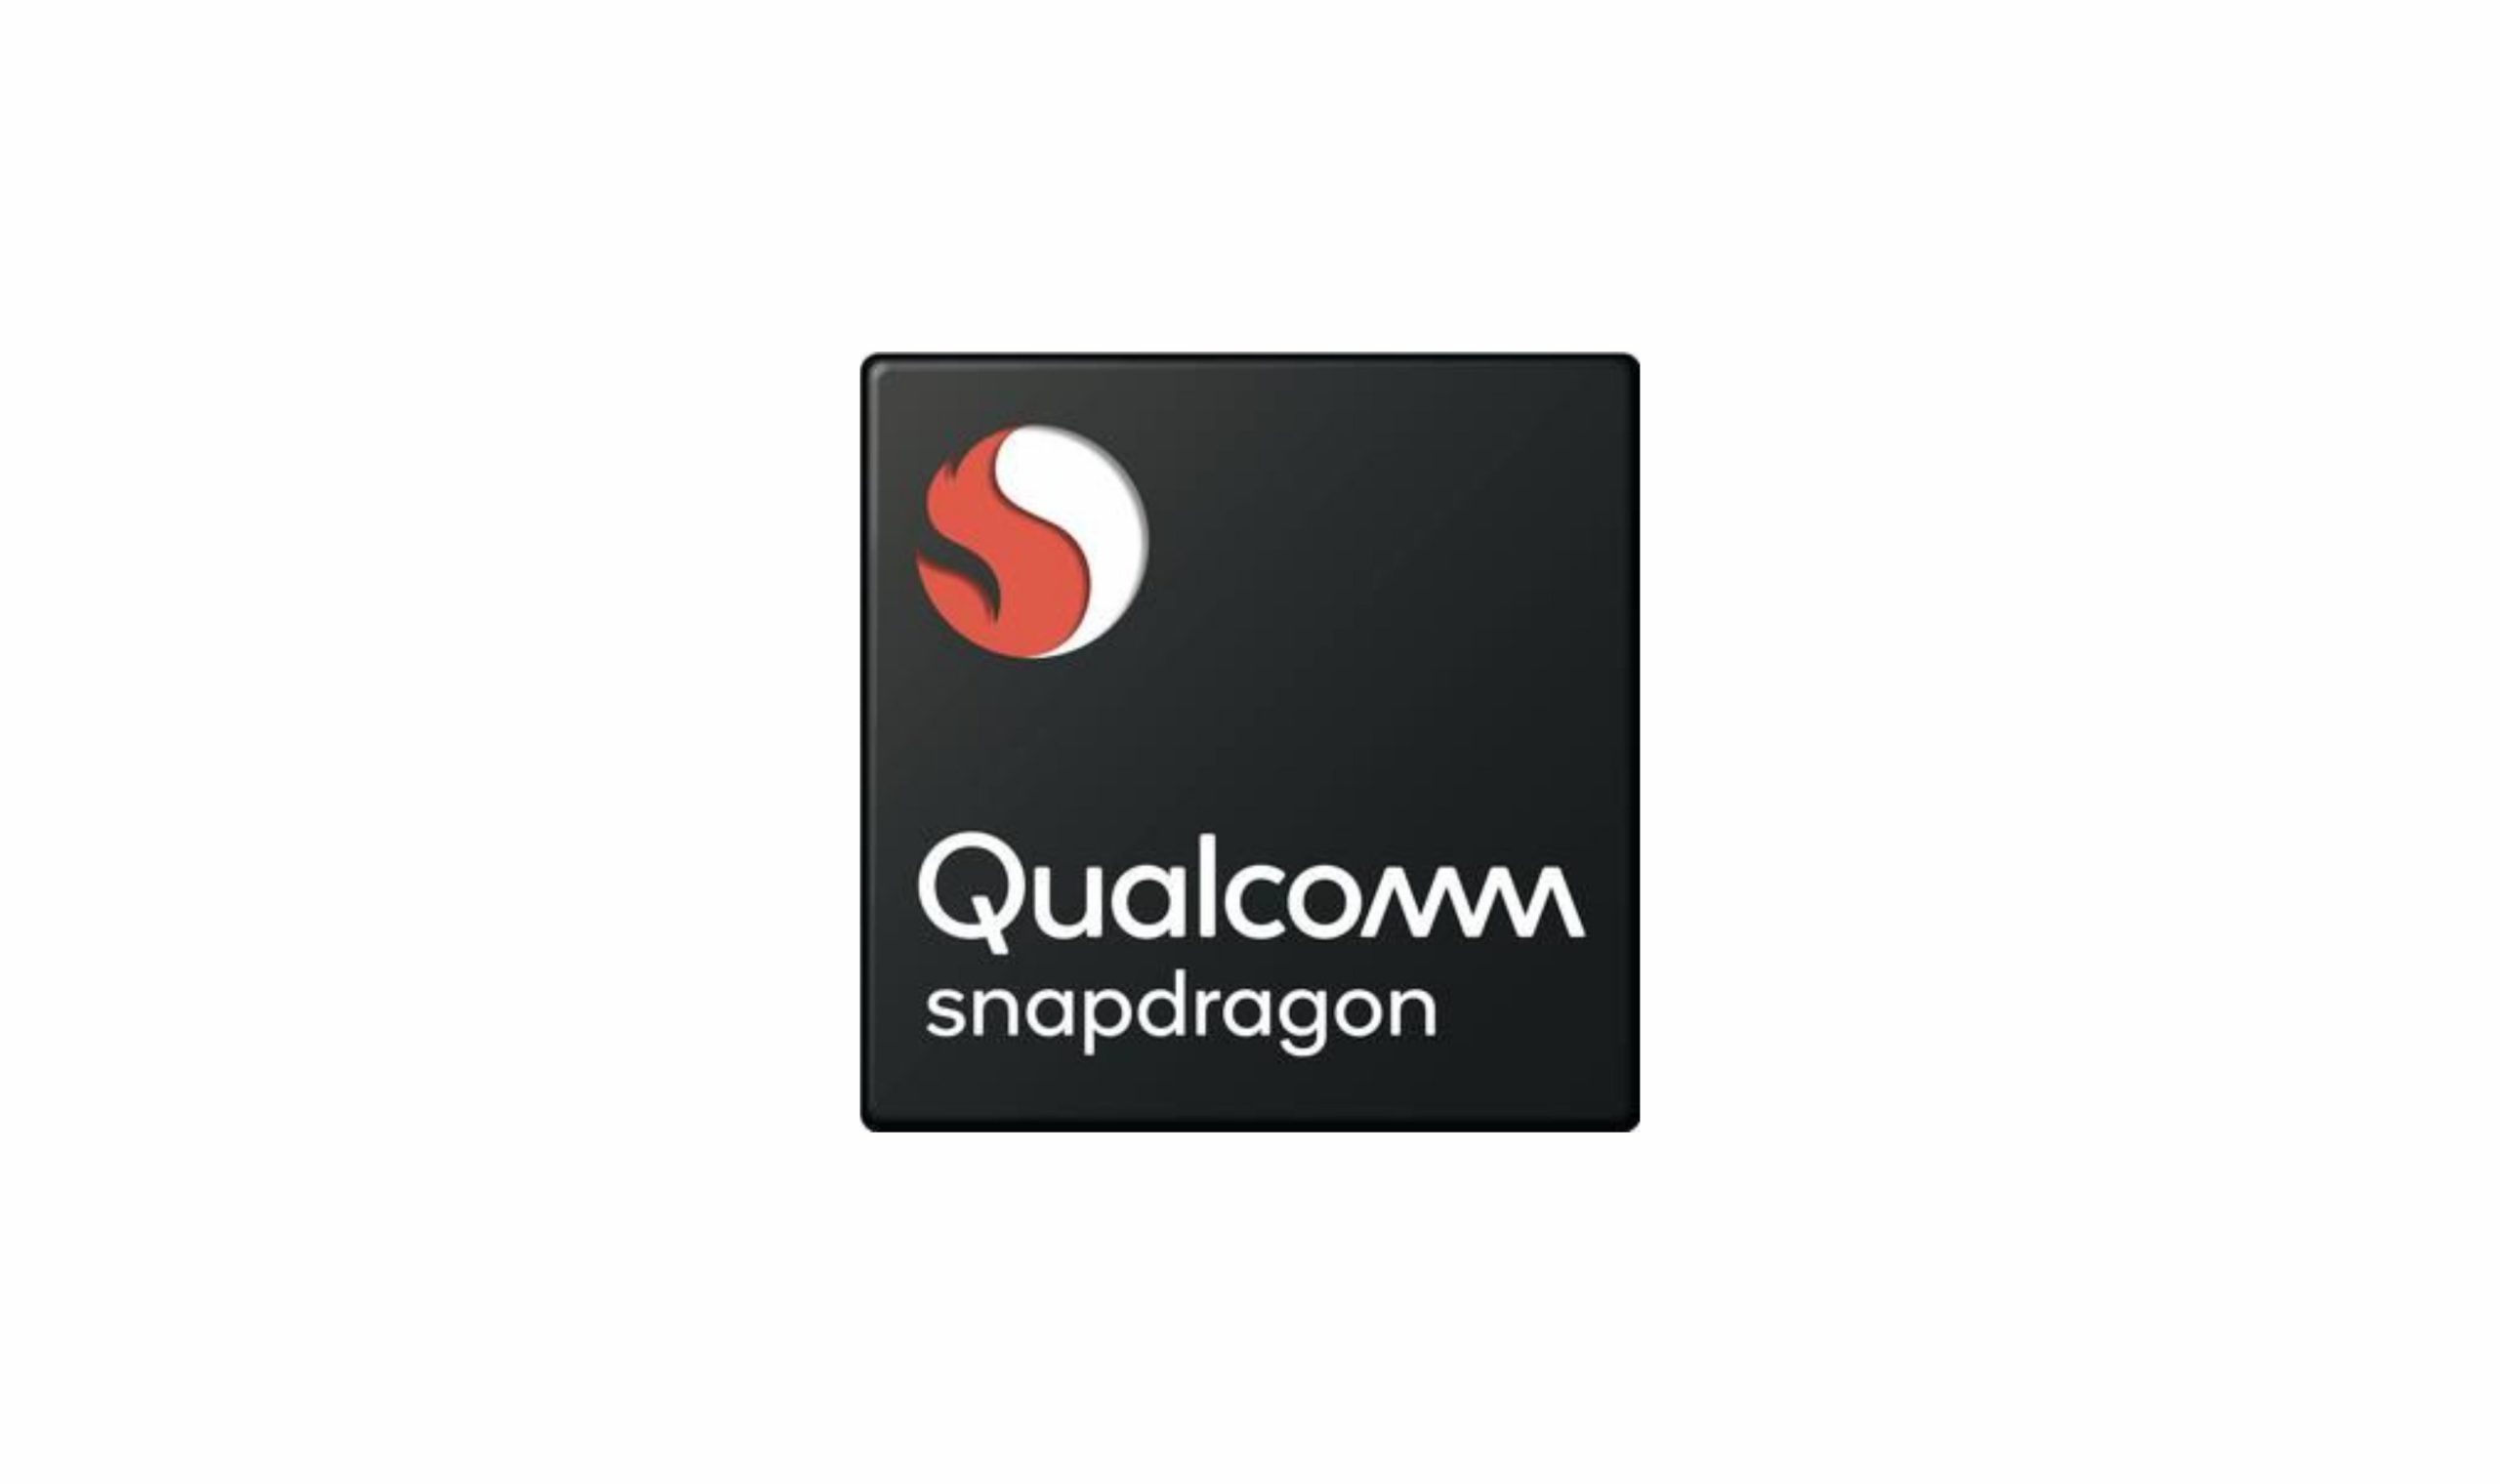 List of companies that could launch the Snapdragon 875 Smartphones early tipped